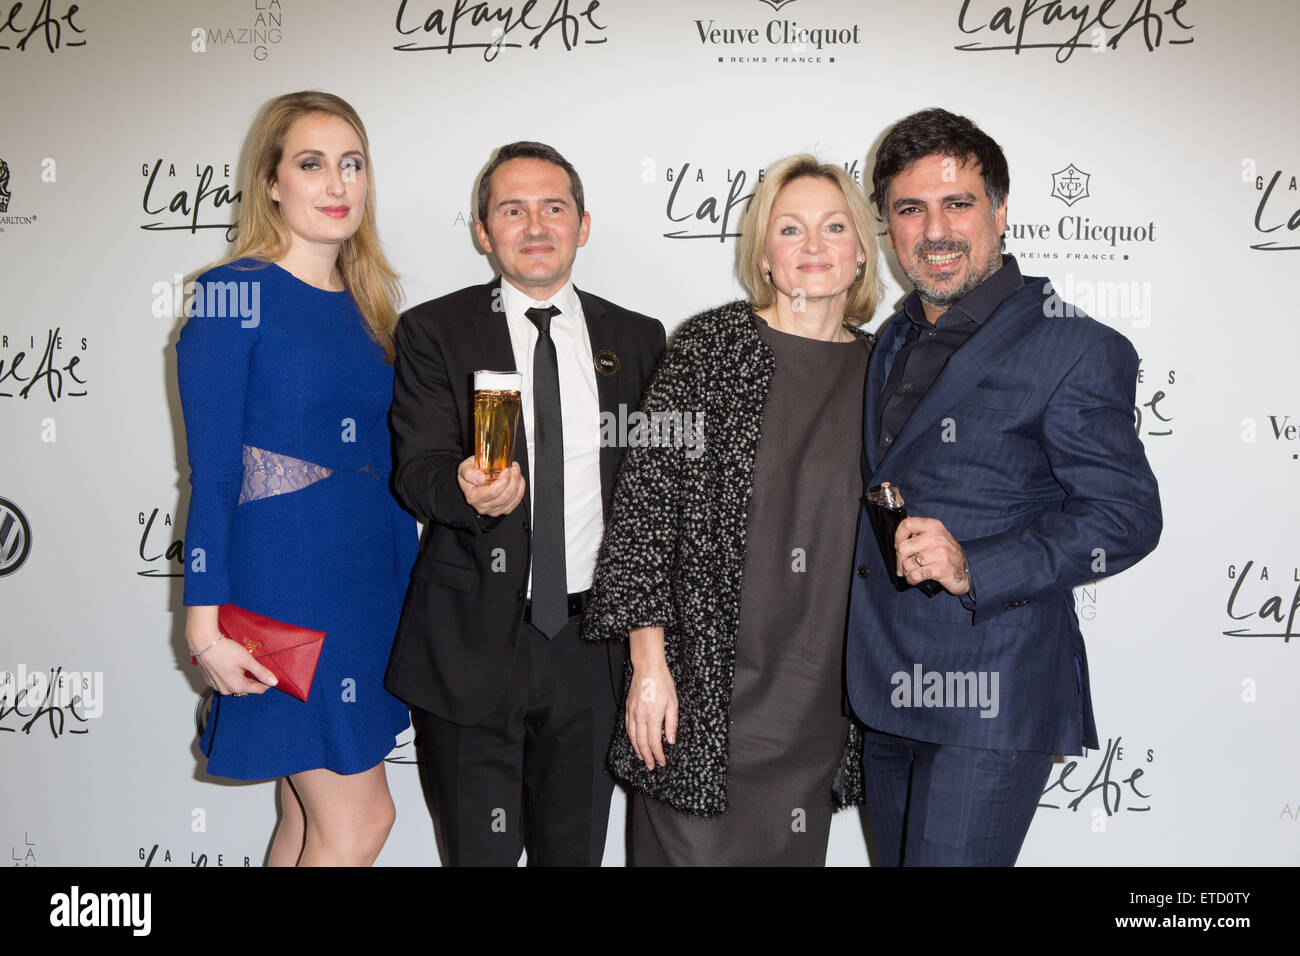 Fragrance launch Amazing by Lang Lang at Galeries Lafayette. Featuring ...